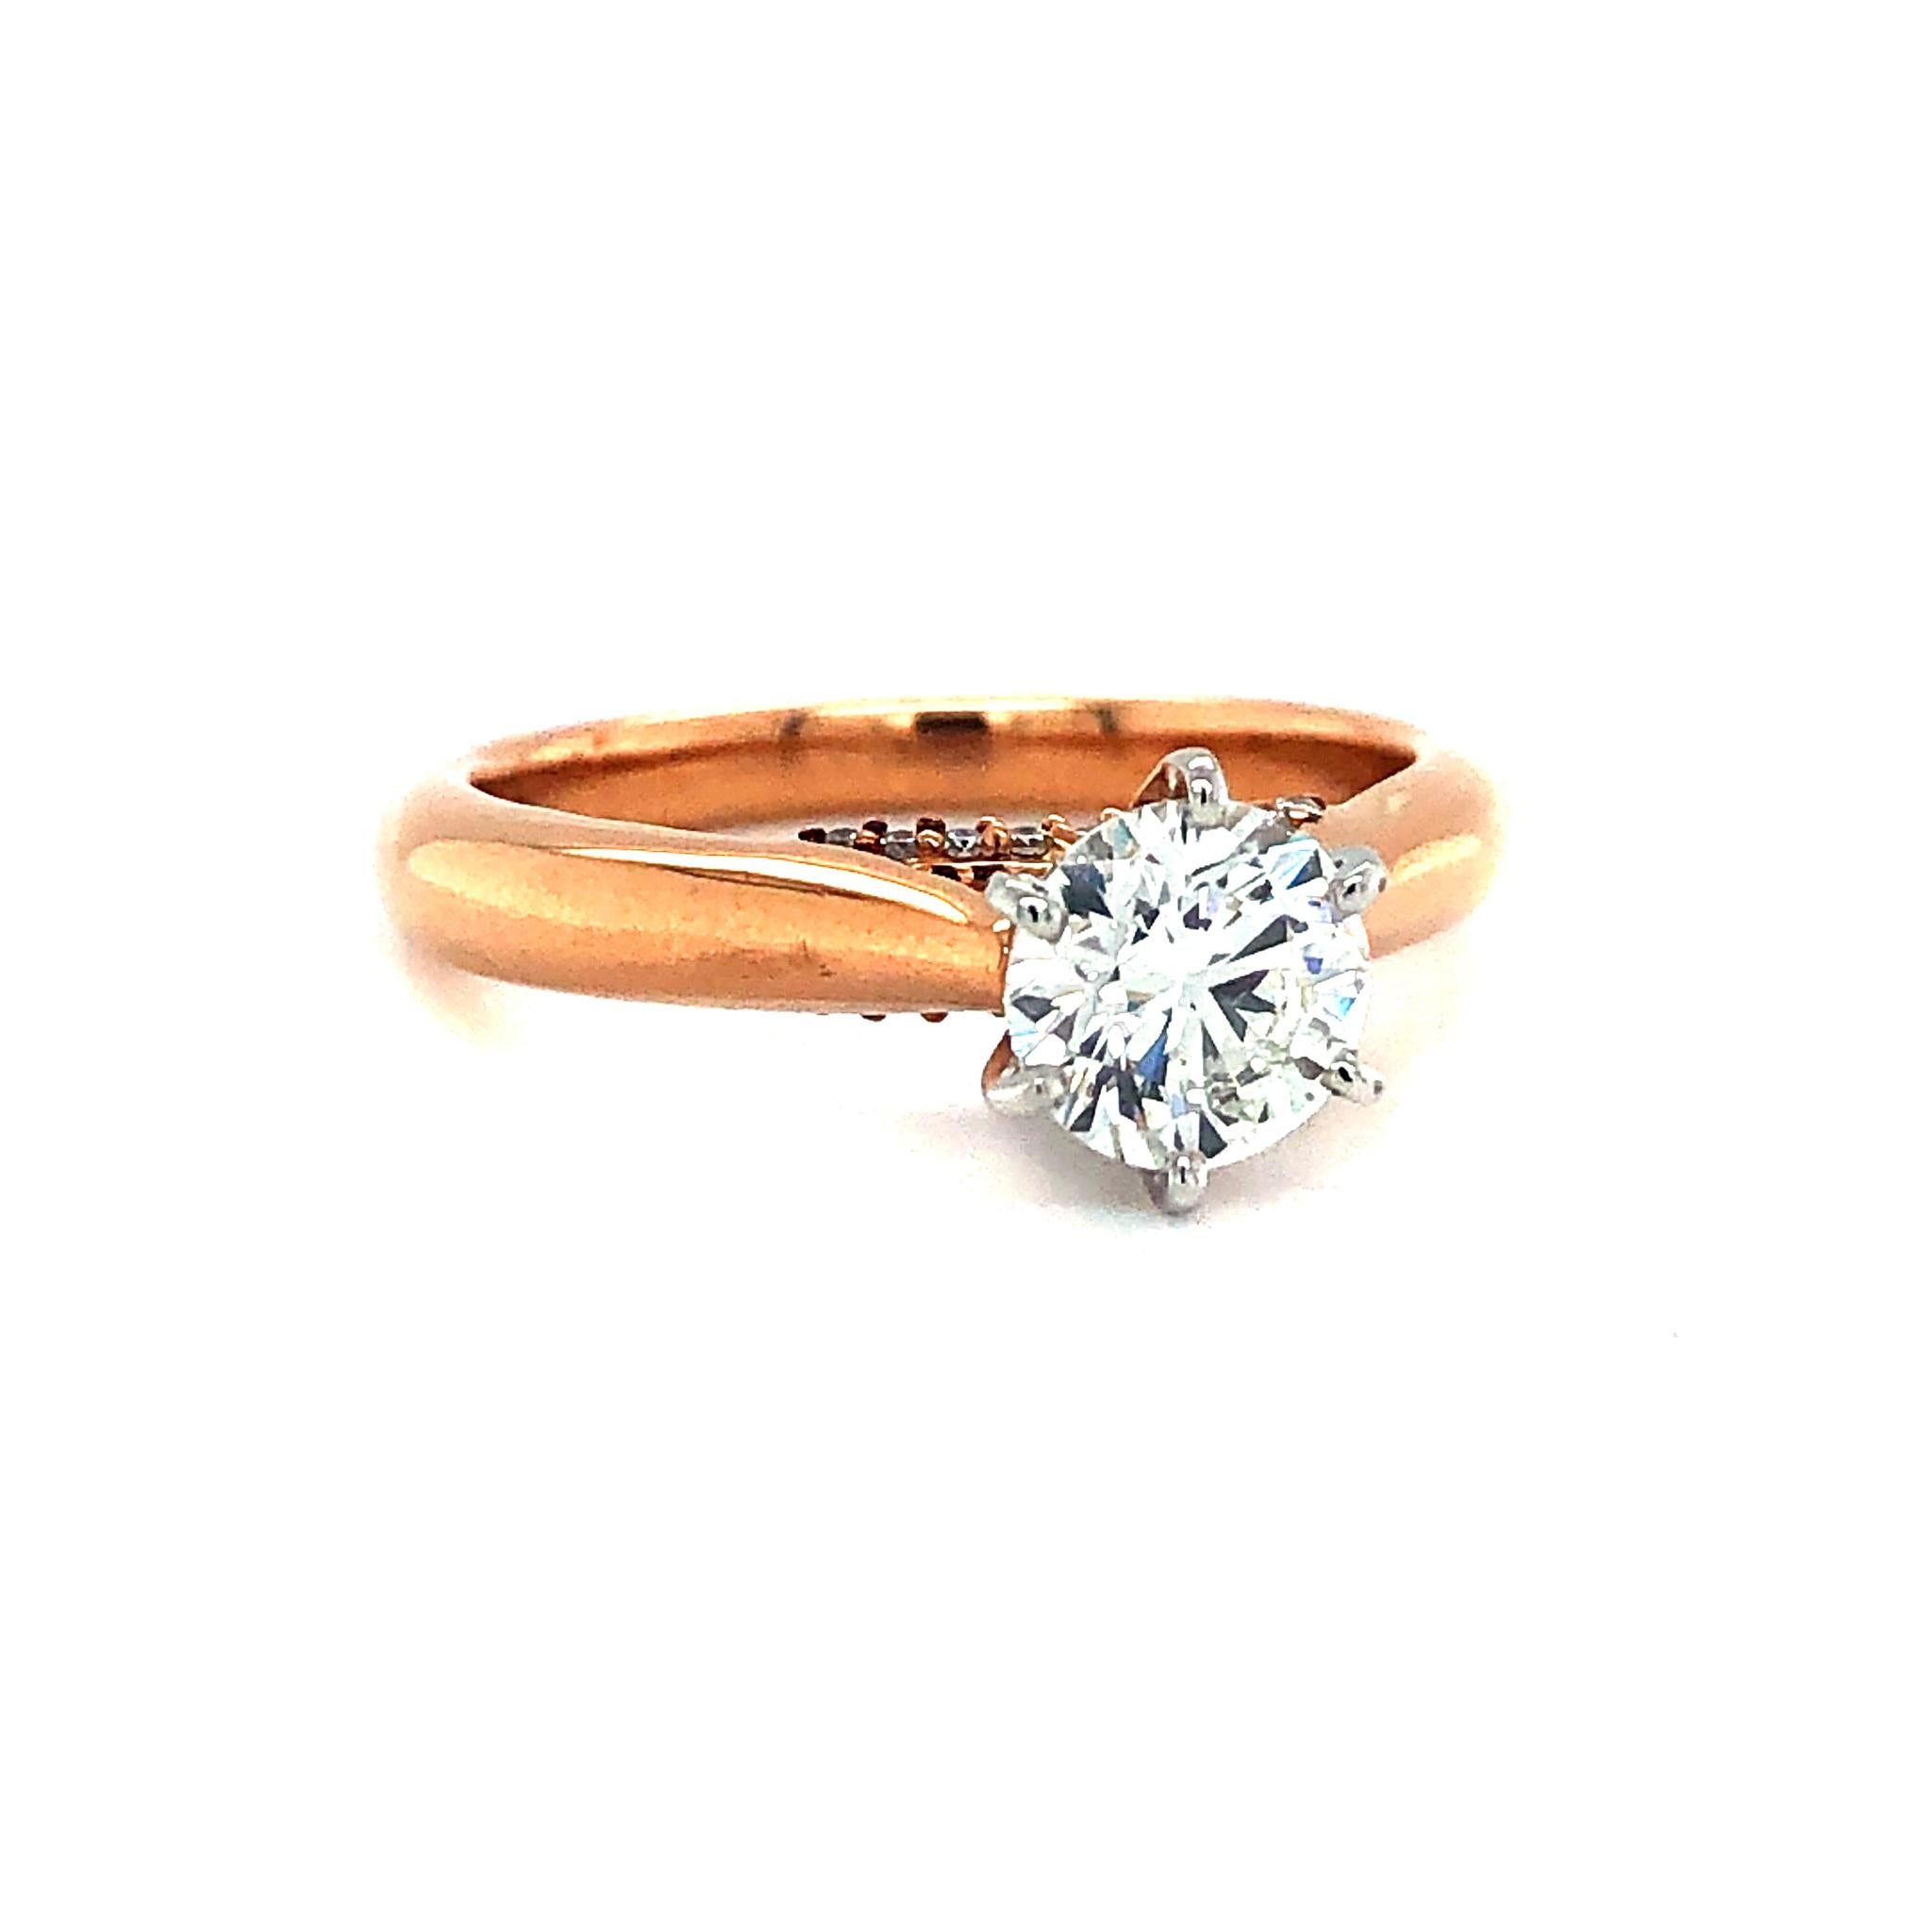 14k Rose Gold 0.90ct GIA Certified Diamond Solitaire Engagement Ring Size 6.75

Condition:  Excellent Condition, Professionally Cleaned and Polished
Metal:  14k Gold (Marked, and Professionally Tested)
Diamond:  Round Brilliant Diamond .90ct
Diamond